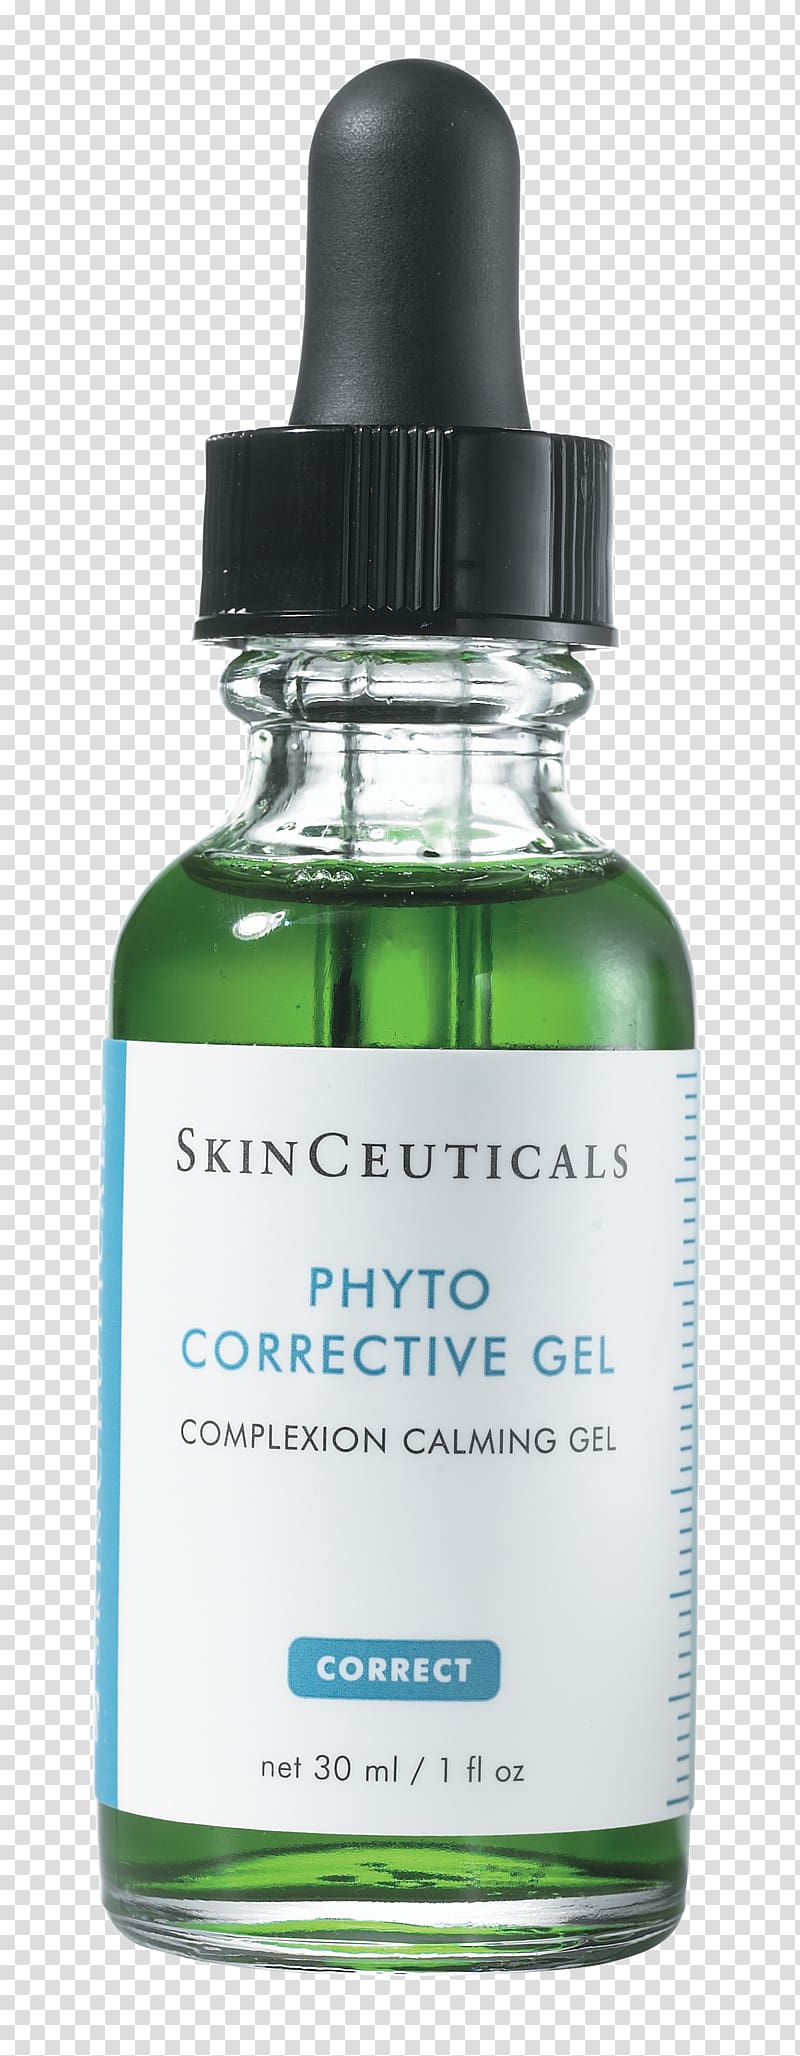 SkinCeuticals Phyto Corrective Gel Skinceuticals Phyto Corrective Masque Sunscreen SkinCeuticals Hydrating B5 Gel, others transparent background PNG clipart